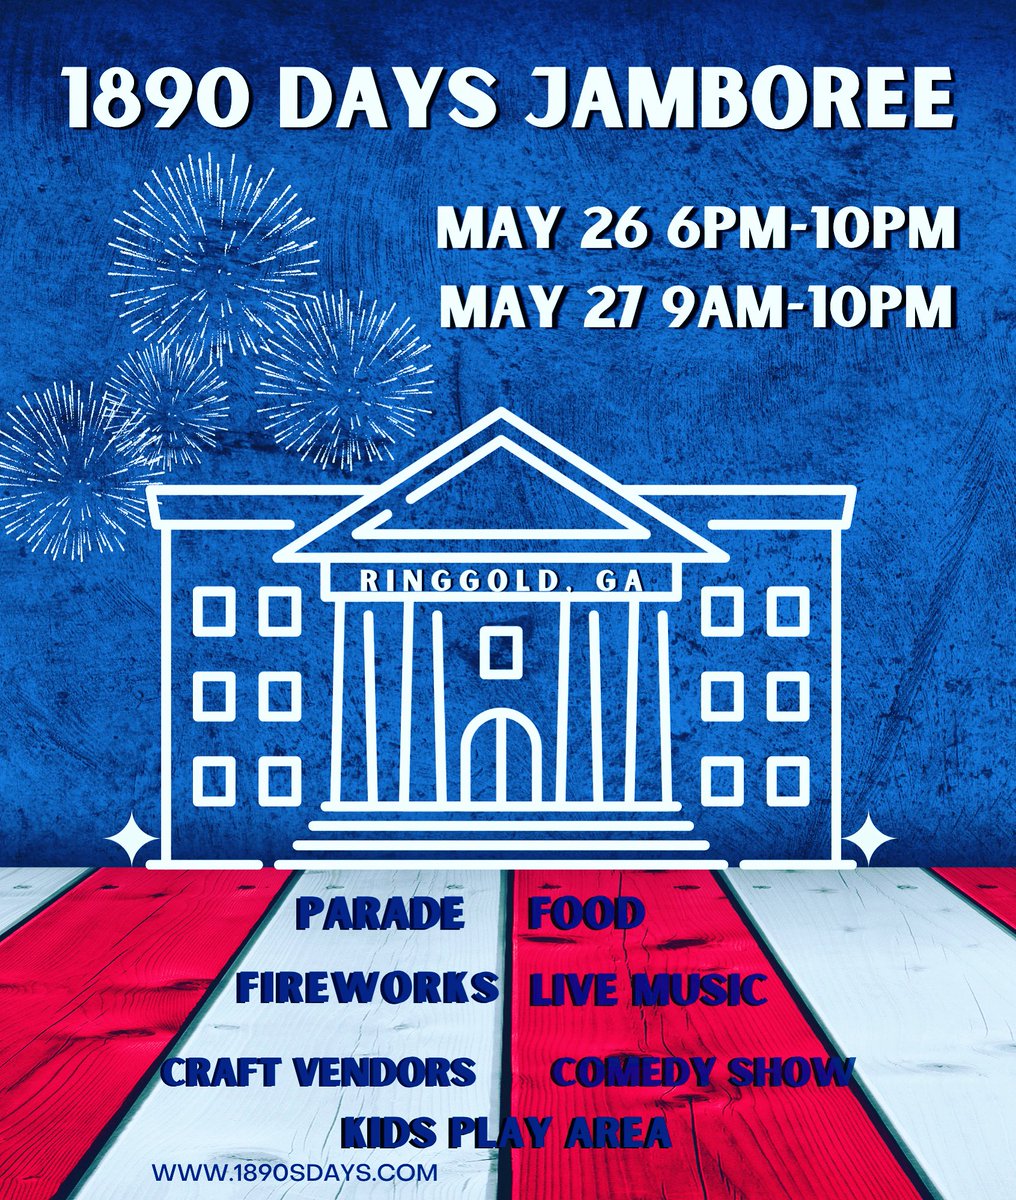 Our biggest festival starts tomorrow! Hope to see you all there! 
#nothinlikeringgold #1890days #ringgoldga #catoosaconnects #ringgoldmainst #gamainst